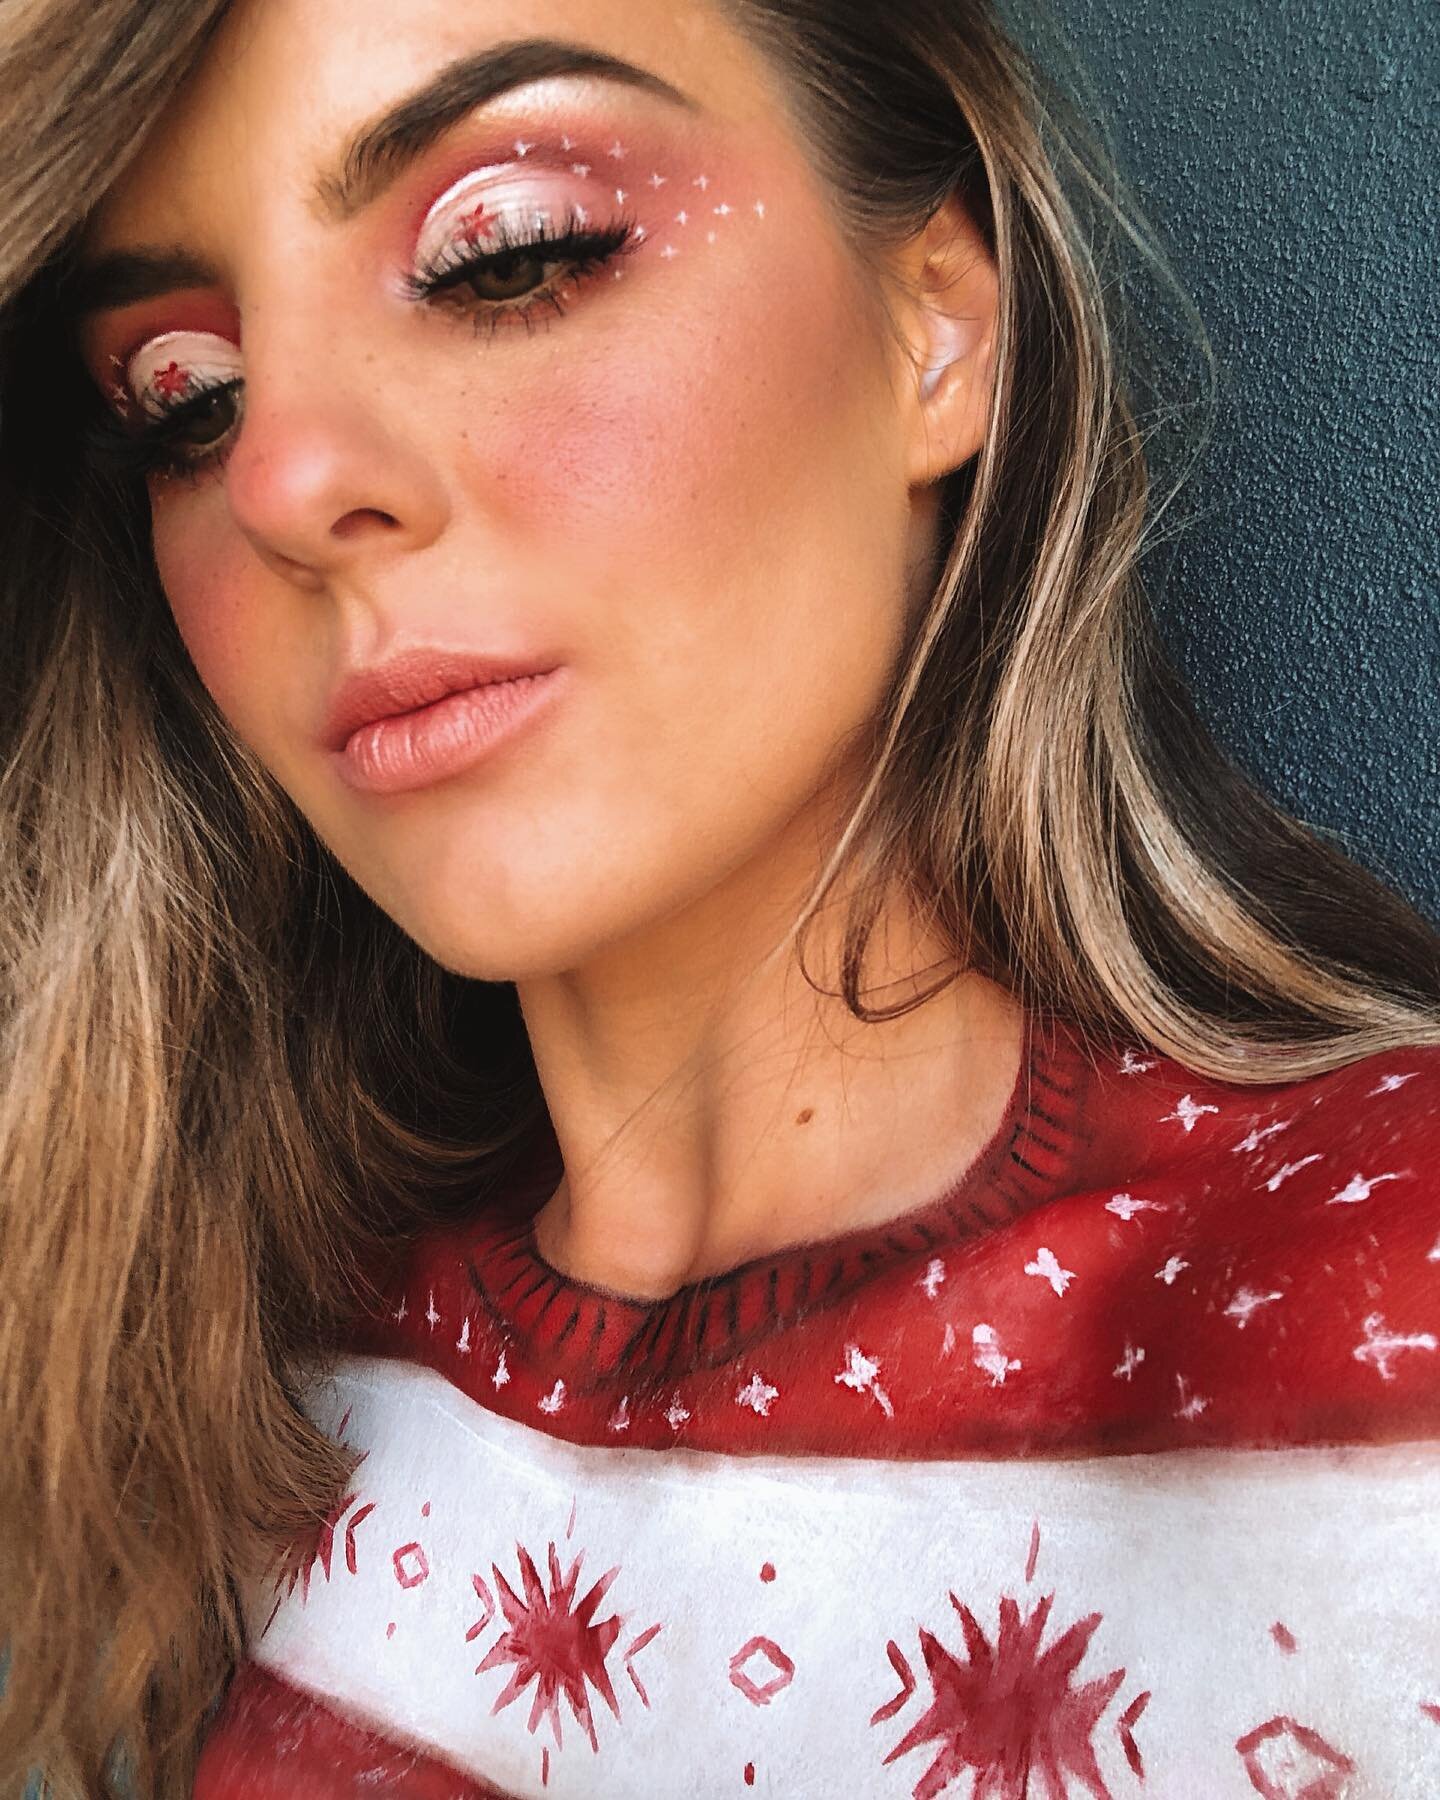 This is the best kind of sweater for a Christmas in Oz! #paintedsweater Merry Christmas everyone! 🎄
.
.
.
.
.

.
.
#christmasmakeup #christmassweater #paintedsweater #festiveseason #creativemakeup #fancyface #dressups #Christmas #goldcoastmakeuparti